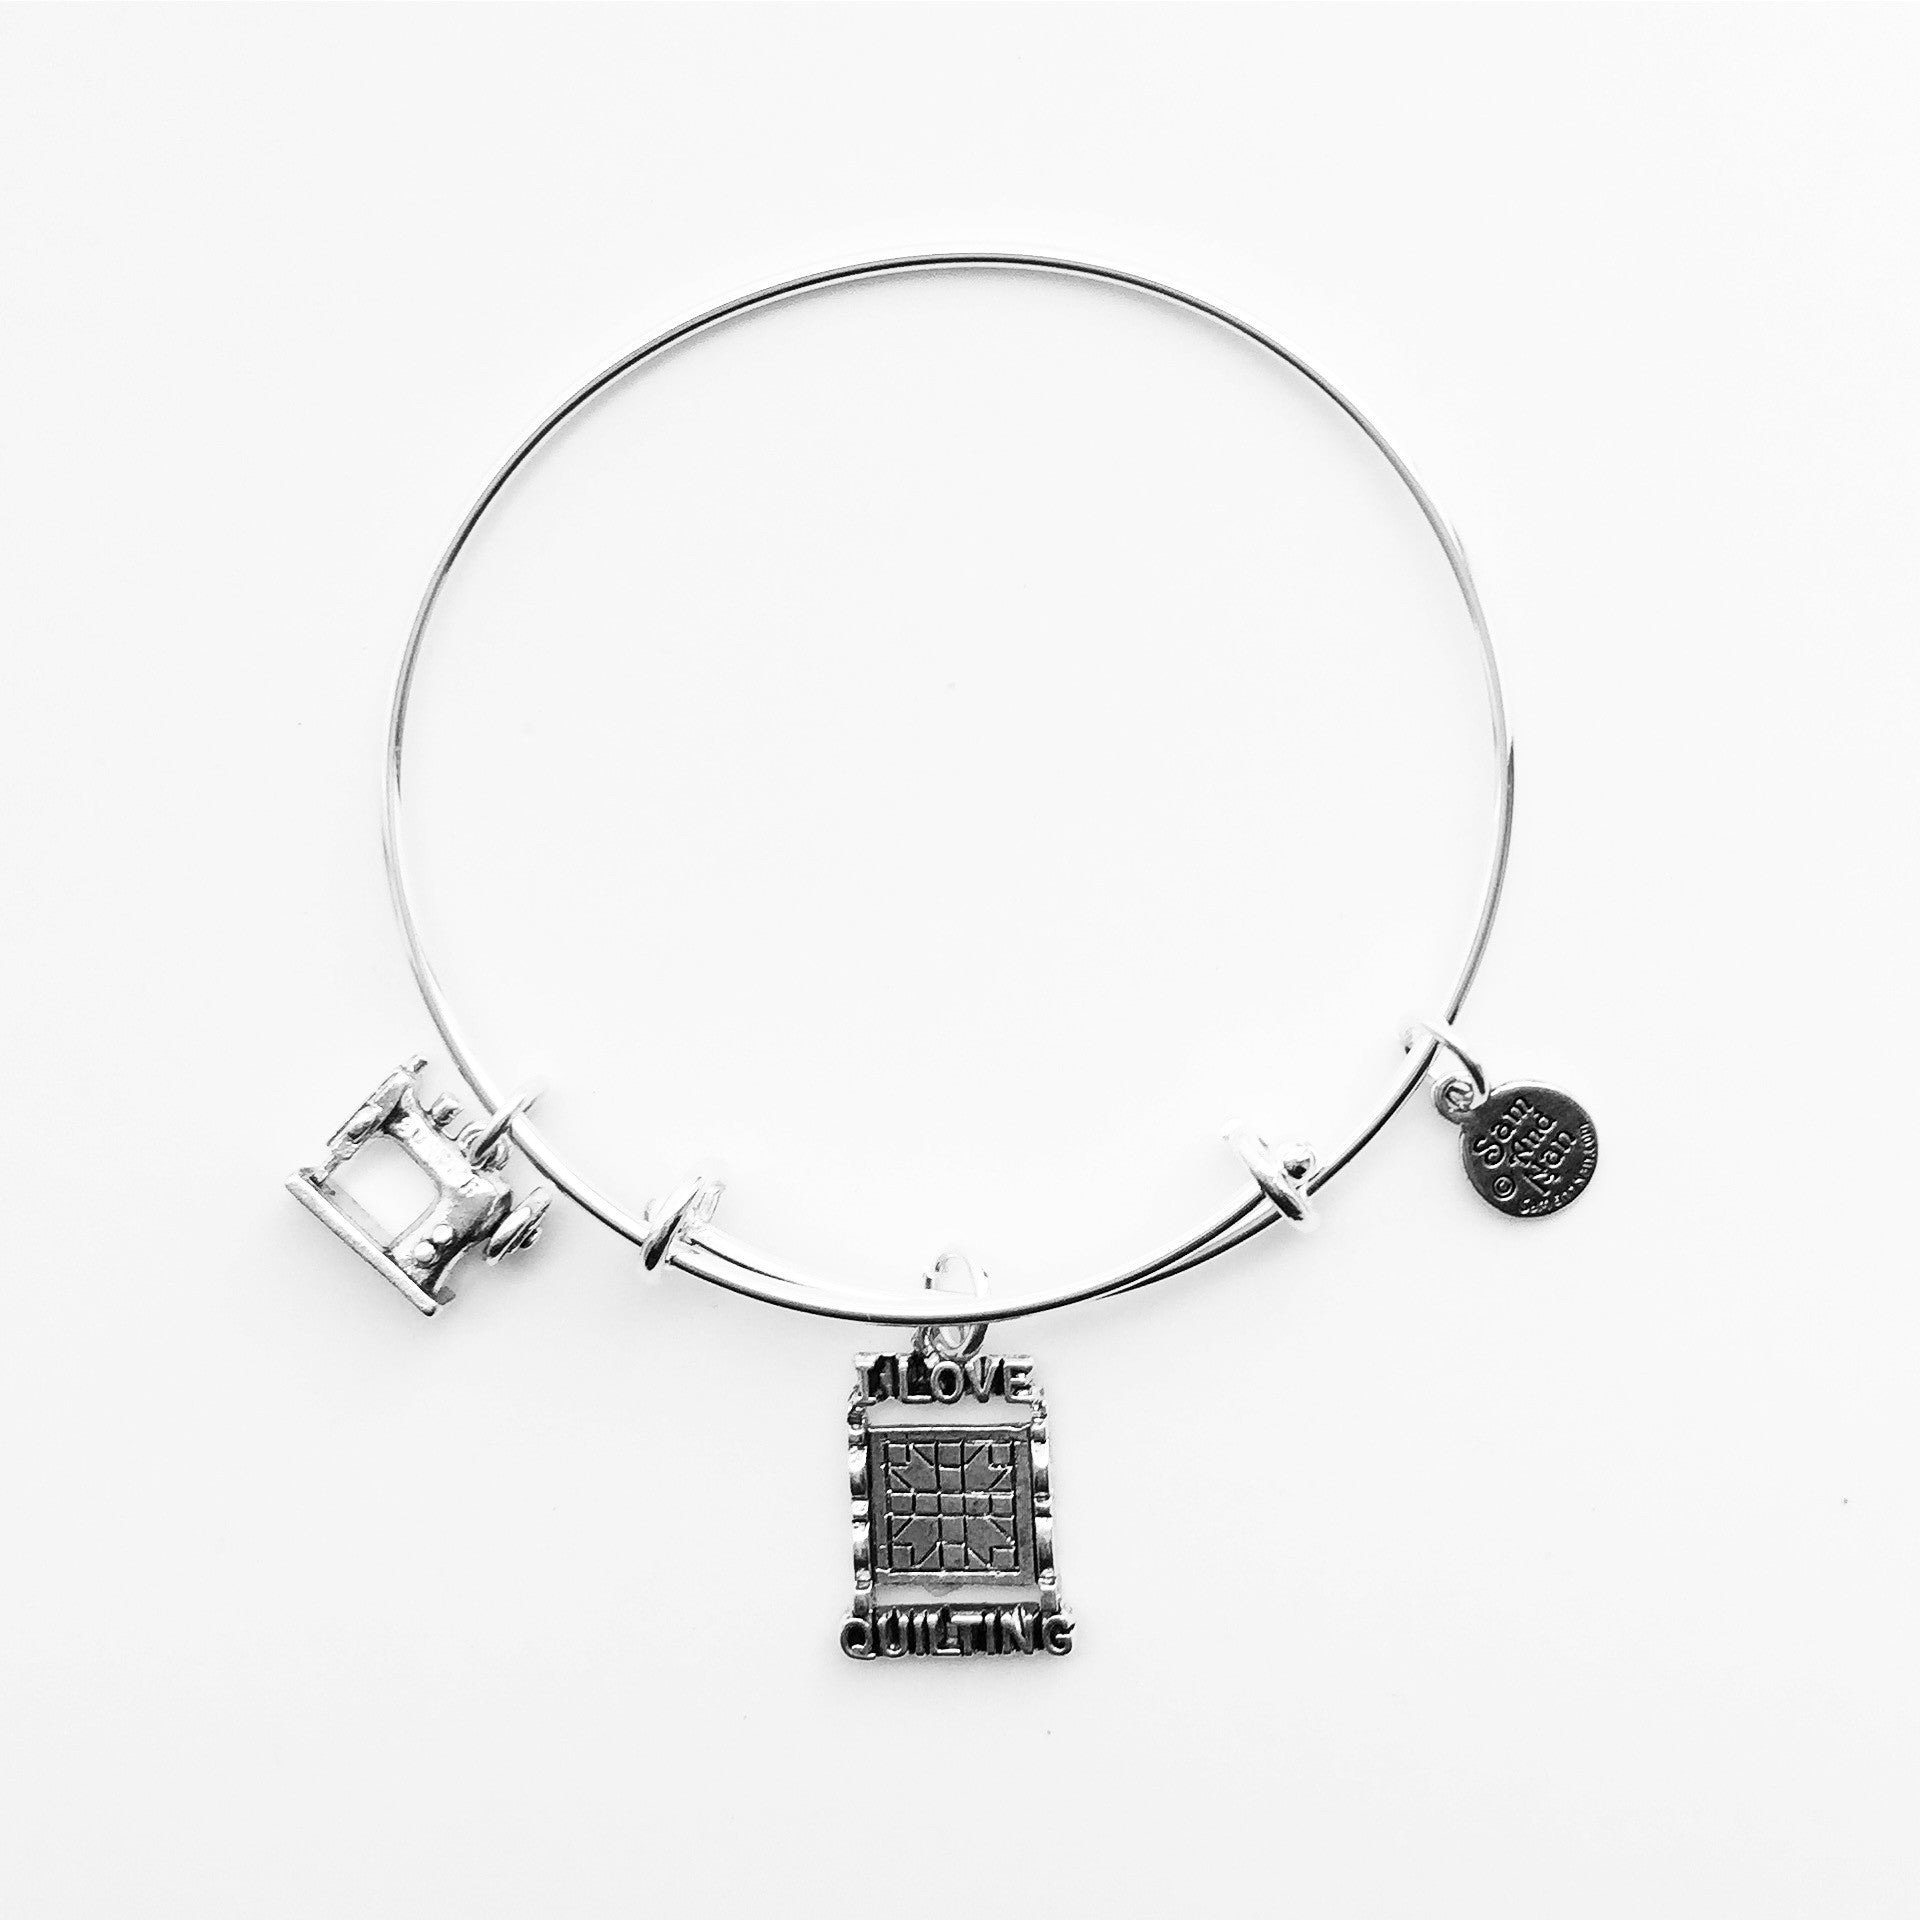 I Love Quilting and Sewing Machine Silver Bangle Bracelet